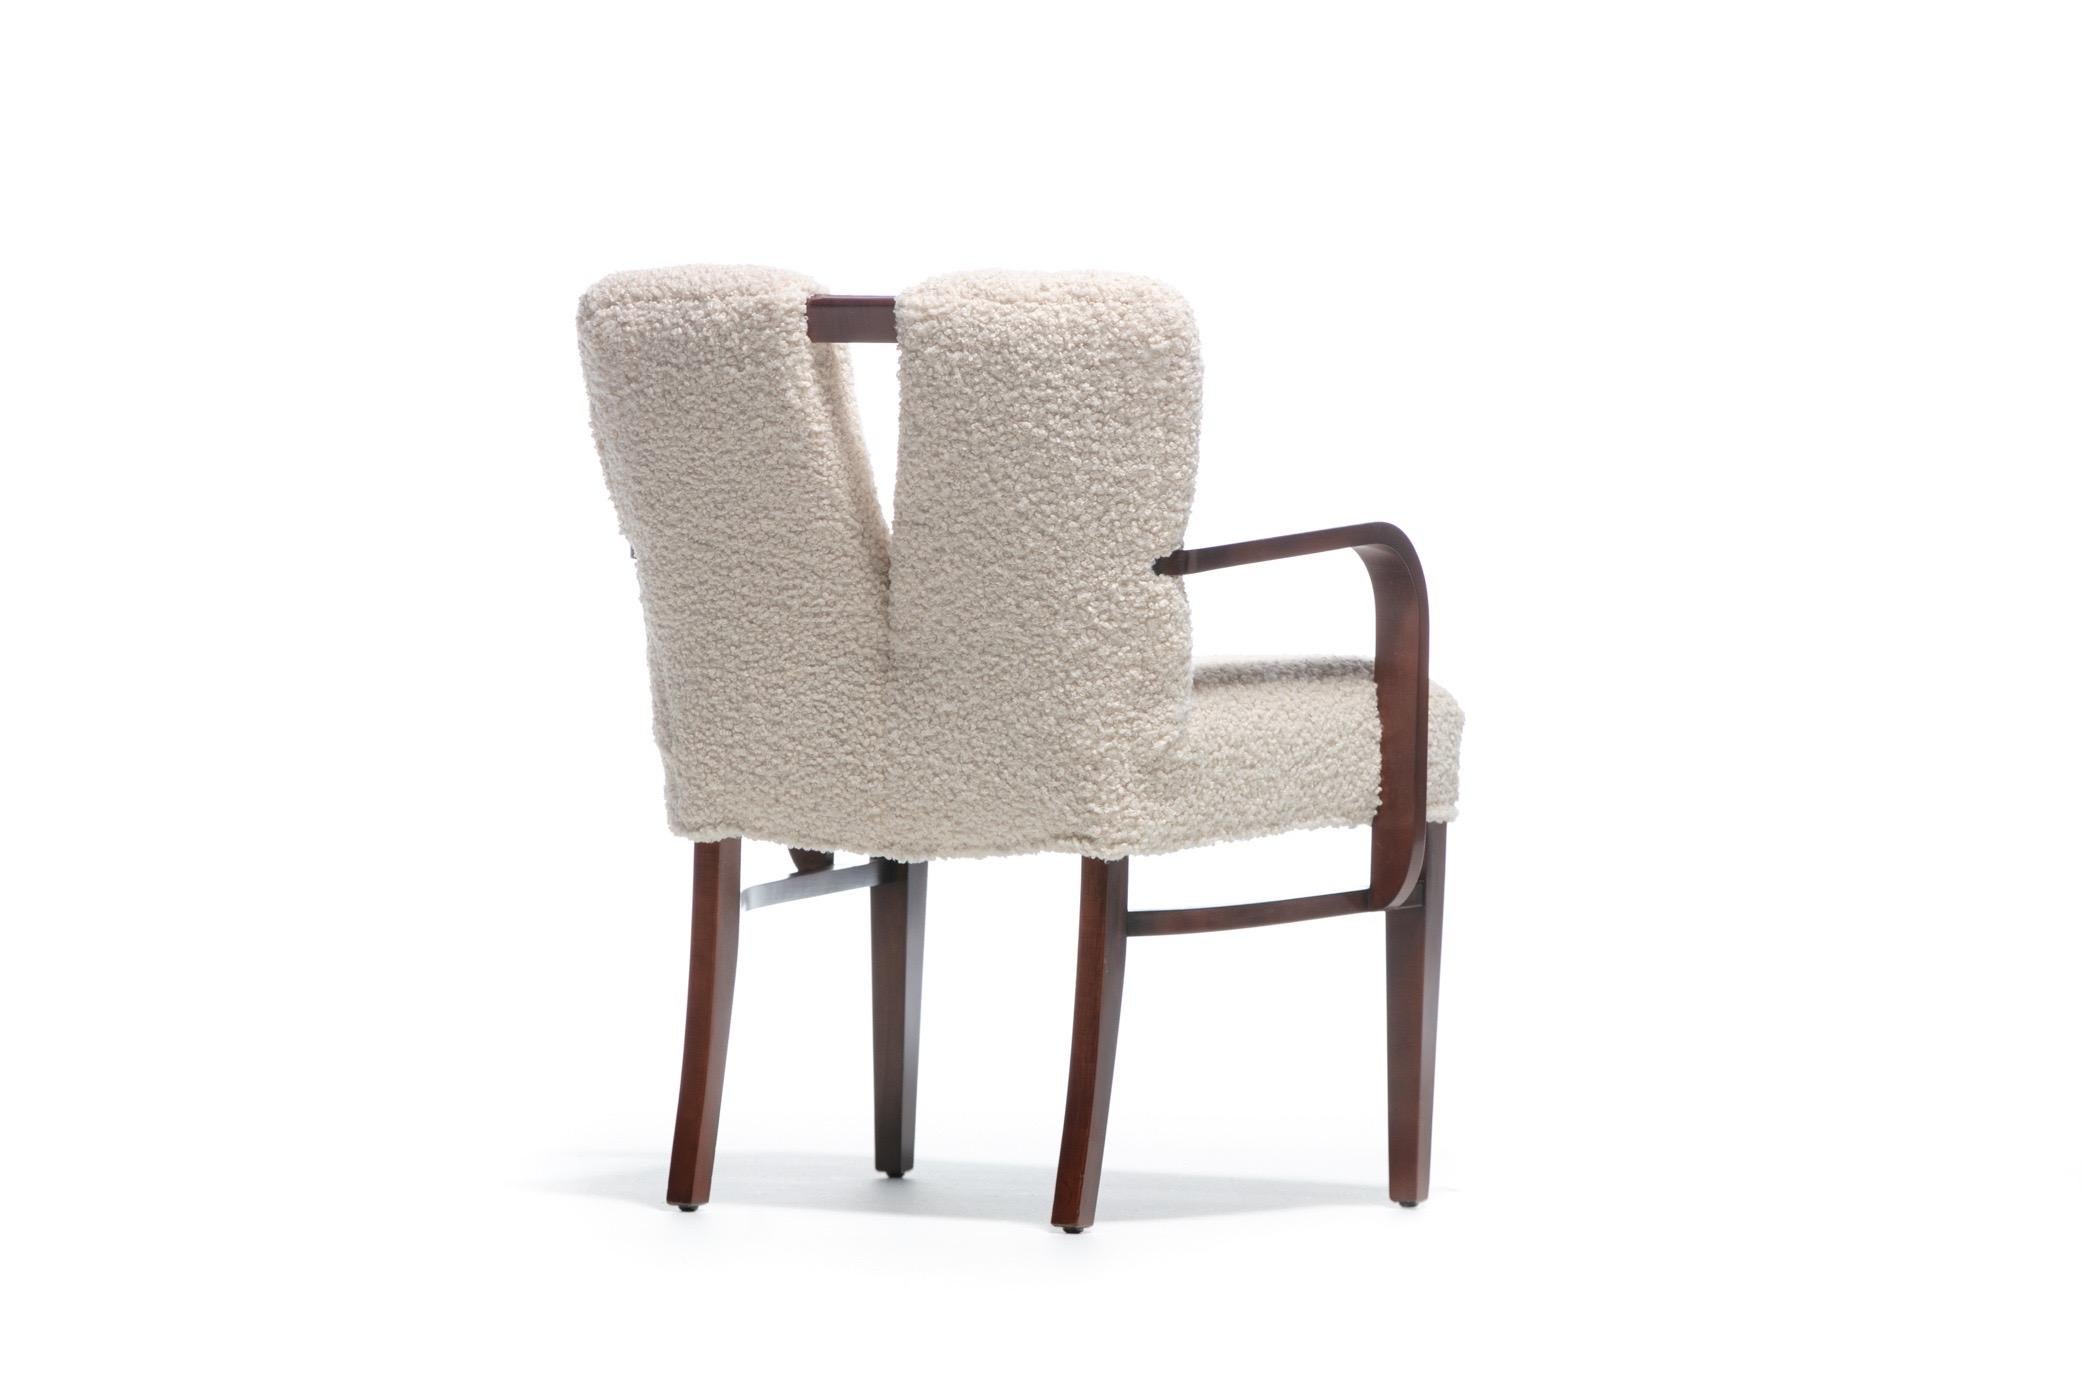 Mahogany Set of 18 Paul Frankl Corset Back Dining Chairs in Ivory White Bouclé, c. 1950s